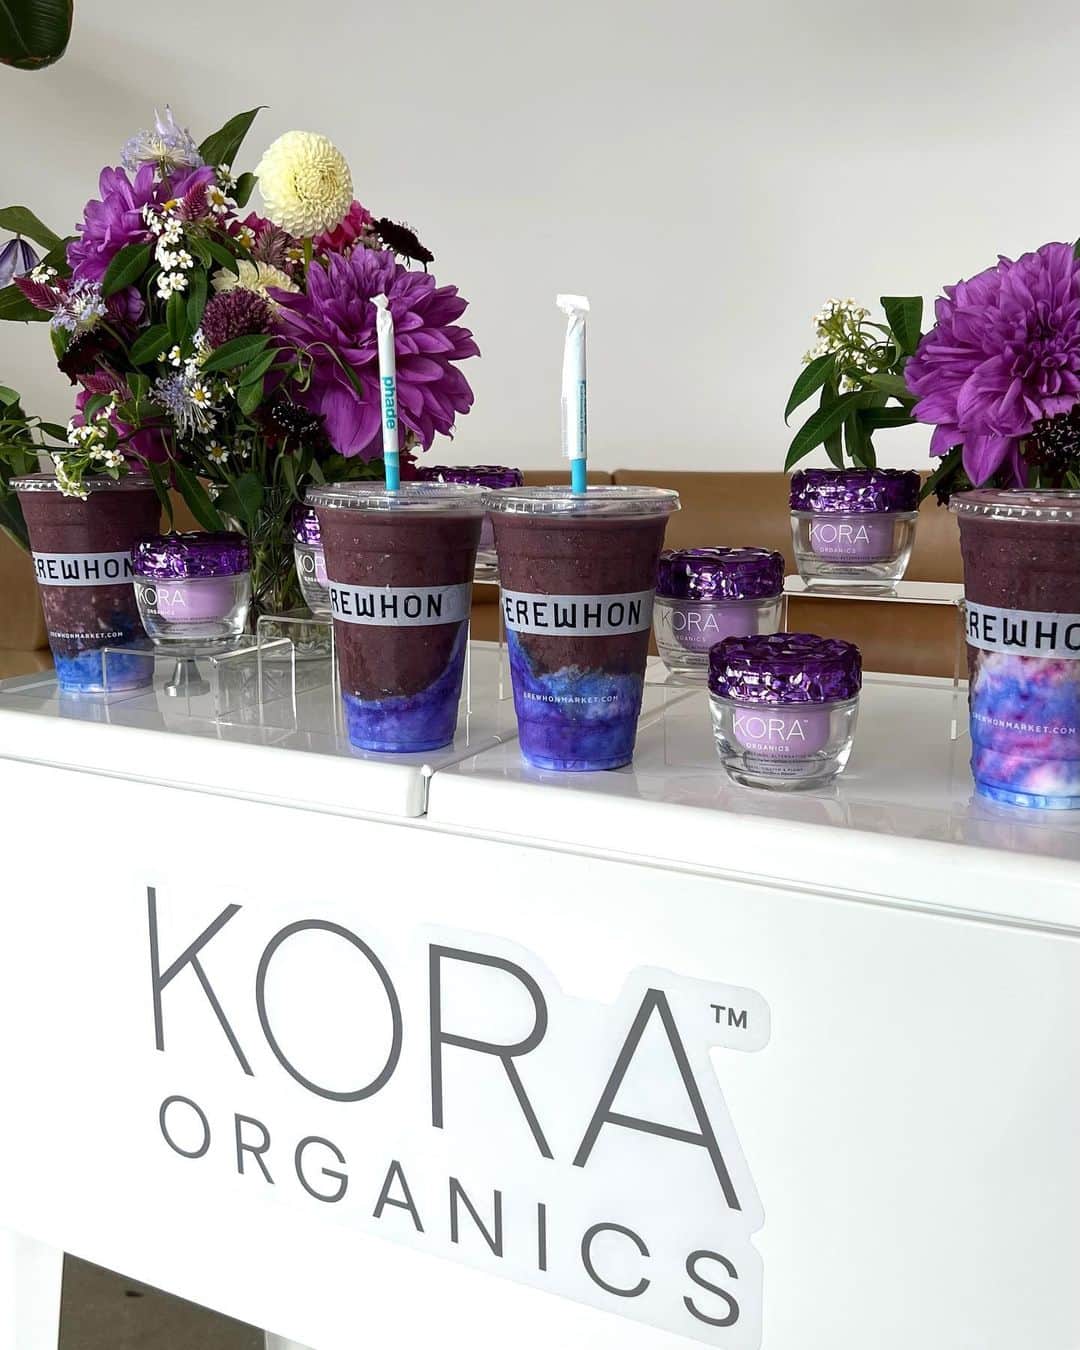 KORA Organicsのインスタグラム：「Special delivery! Our Founder & CEO @mirandakerr has spent the last few days delivering plant-powered goodness to some of KORA’s longtime friends around LA. That includes our Plant Stem Cell Retinol Alternative Moisturizer and Miranda's limited-edition @erewhonmarket KORA Glow Smoothie. Swipe for a peek inside the fun!  P.S. if you're in SoCal and have yet to try Miranda's antioxidant-rich, skin-loving smoothie, head to your local Erewhon before 10/15 💜」